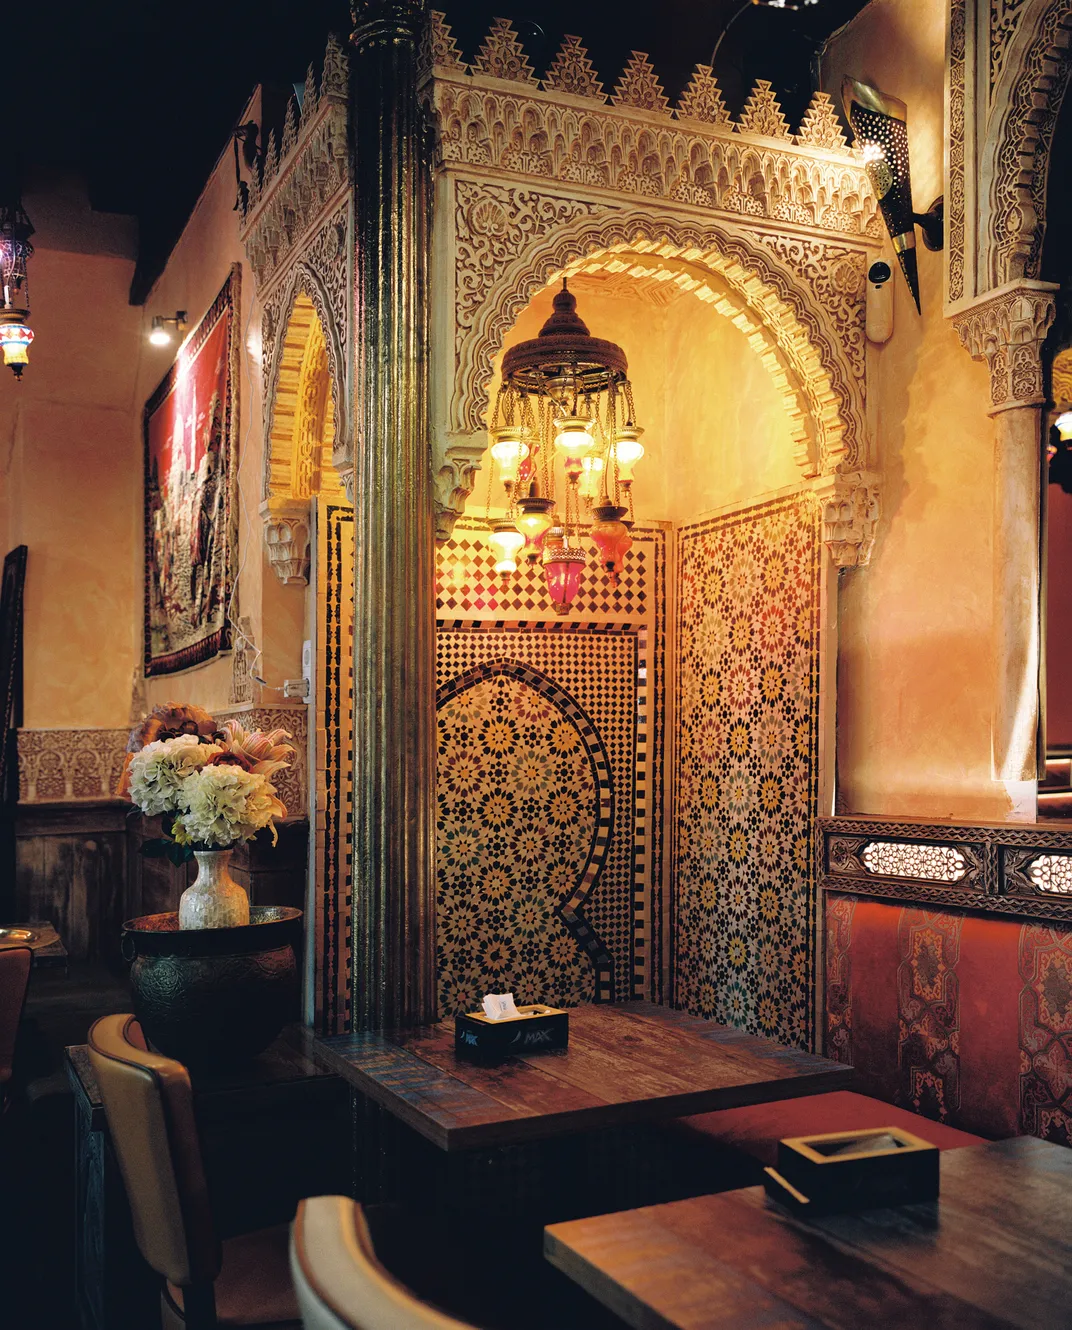 the interior of a Moroccan restaurant